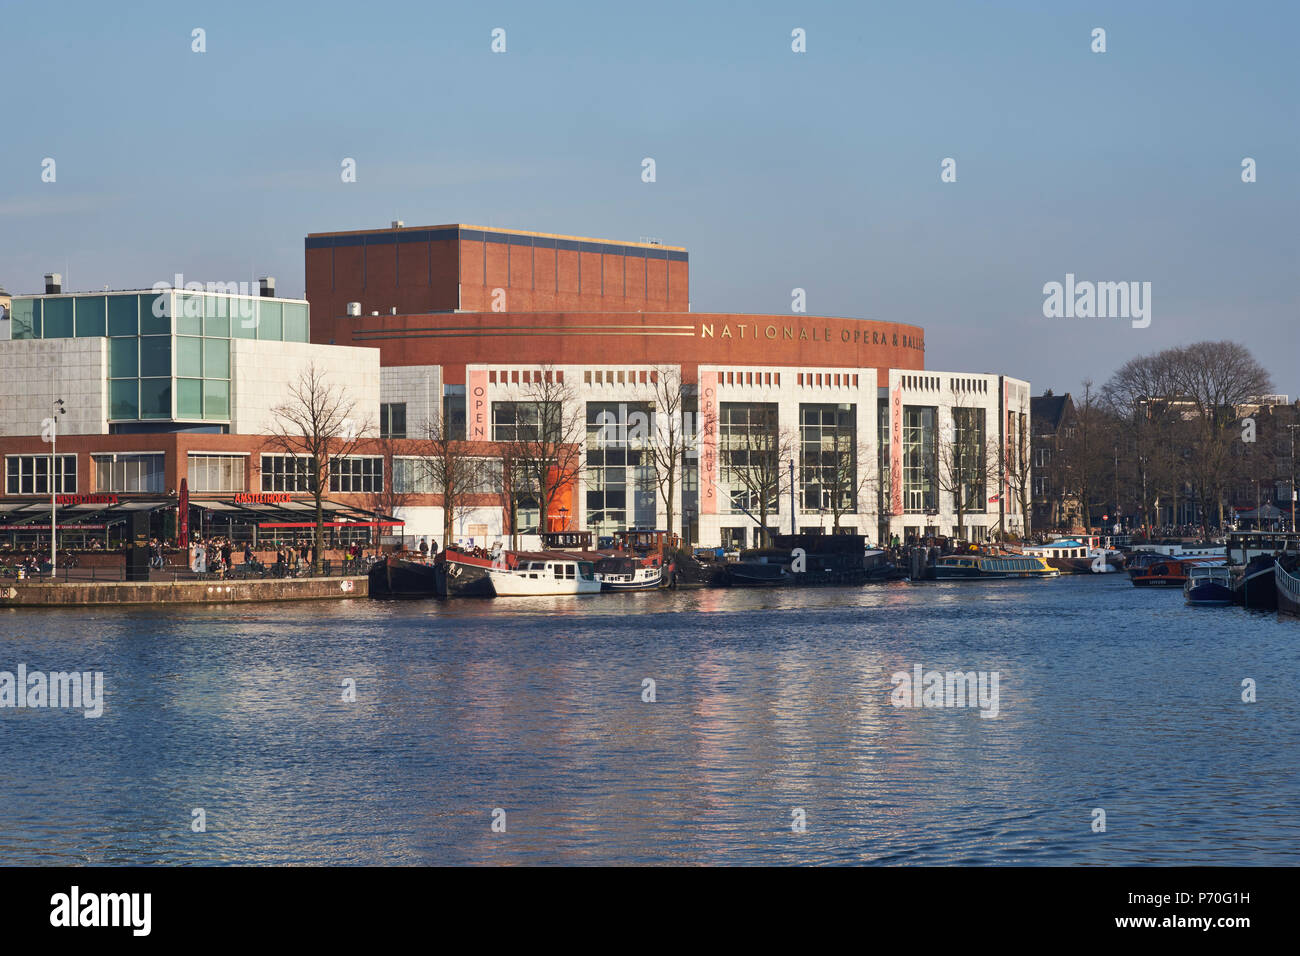 Dutch National Opera and Ballet in Amsterdam, on the borders of the river Amstel at the Waterlooplein. Built 1980s by Dutch architect Cees Dam. Stock Photo